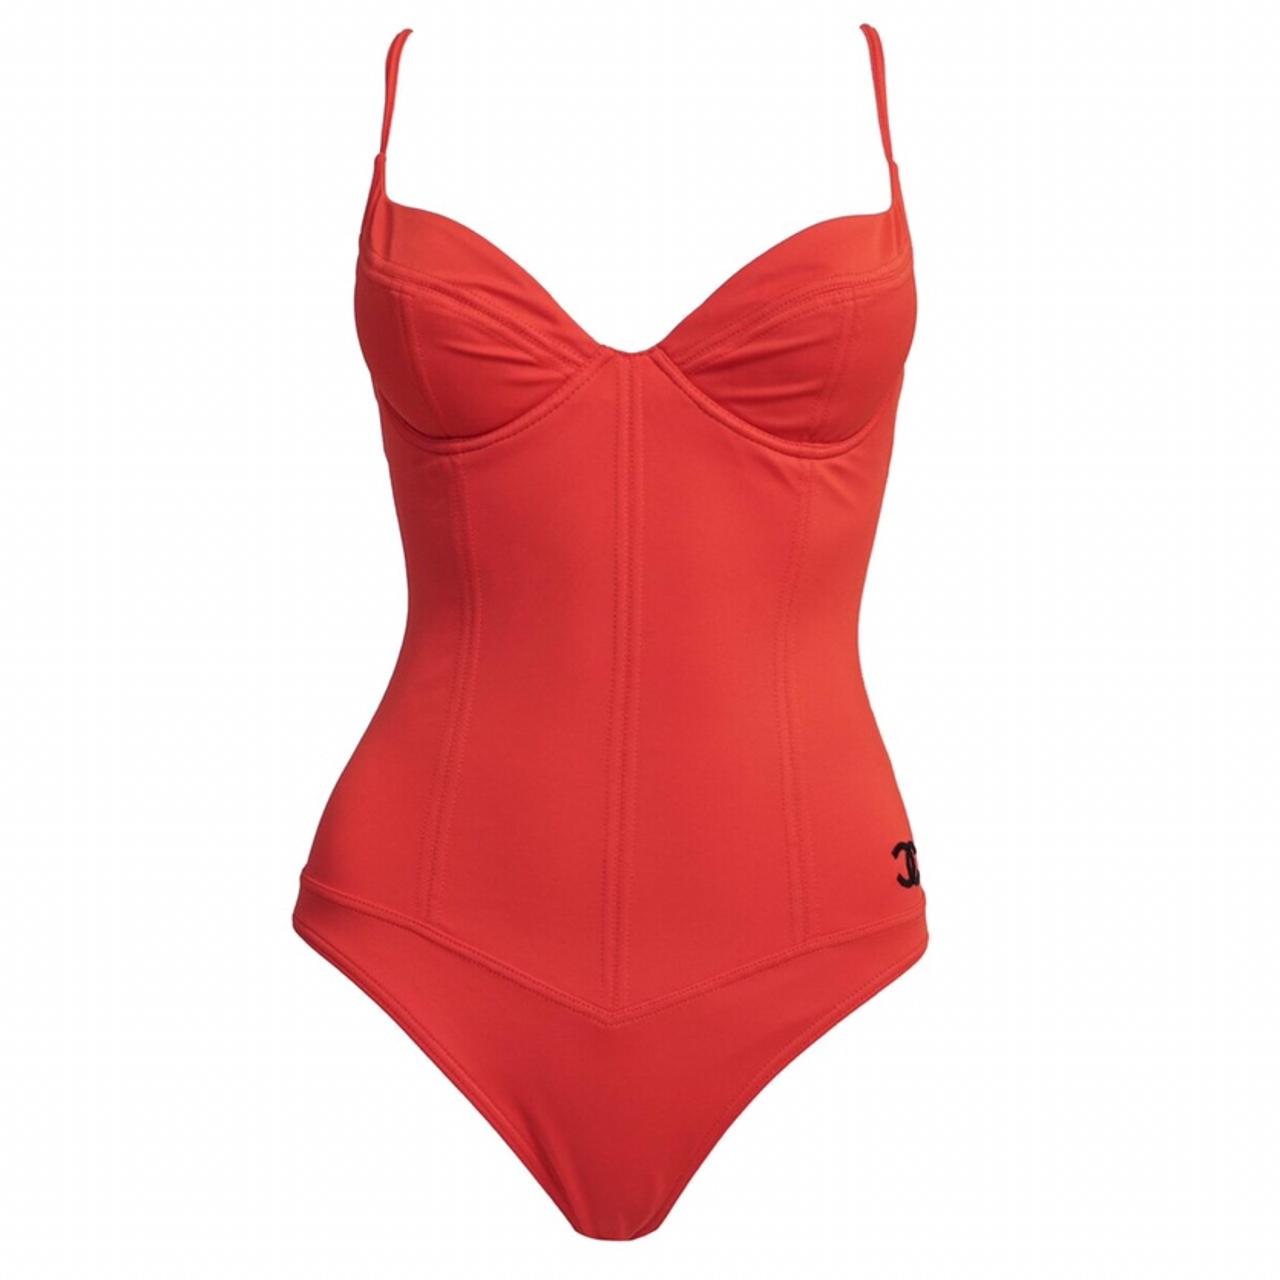 Chanel 1995 Red CC Logo One-Piece Swimsuit size 42.